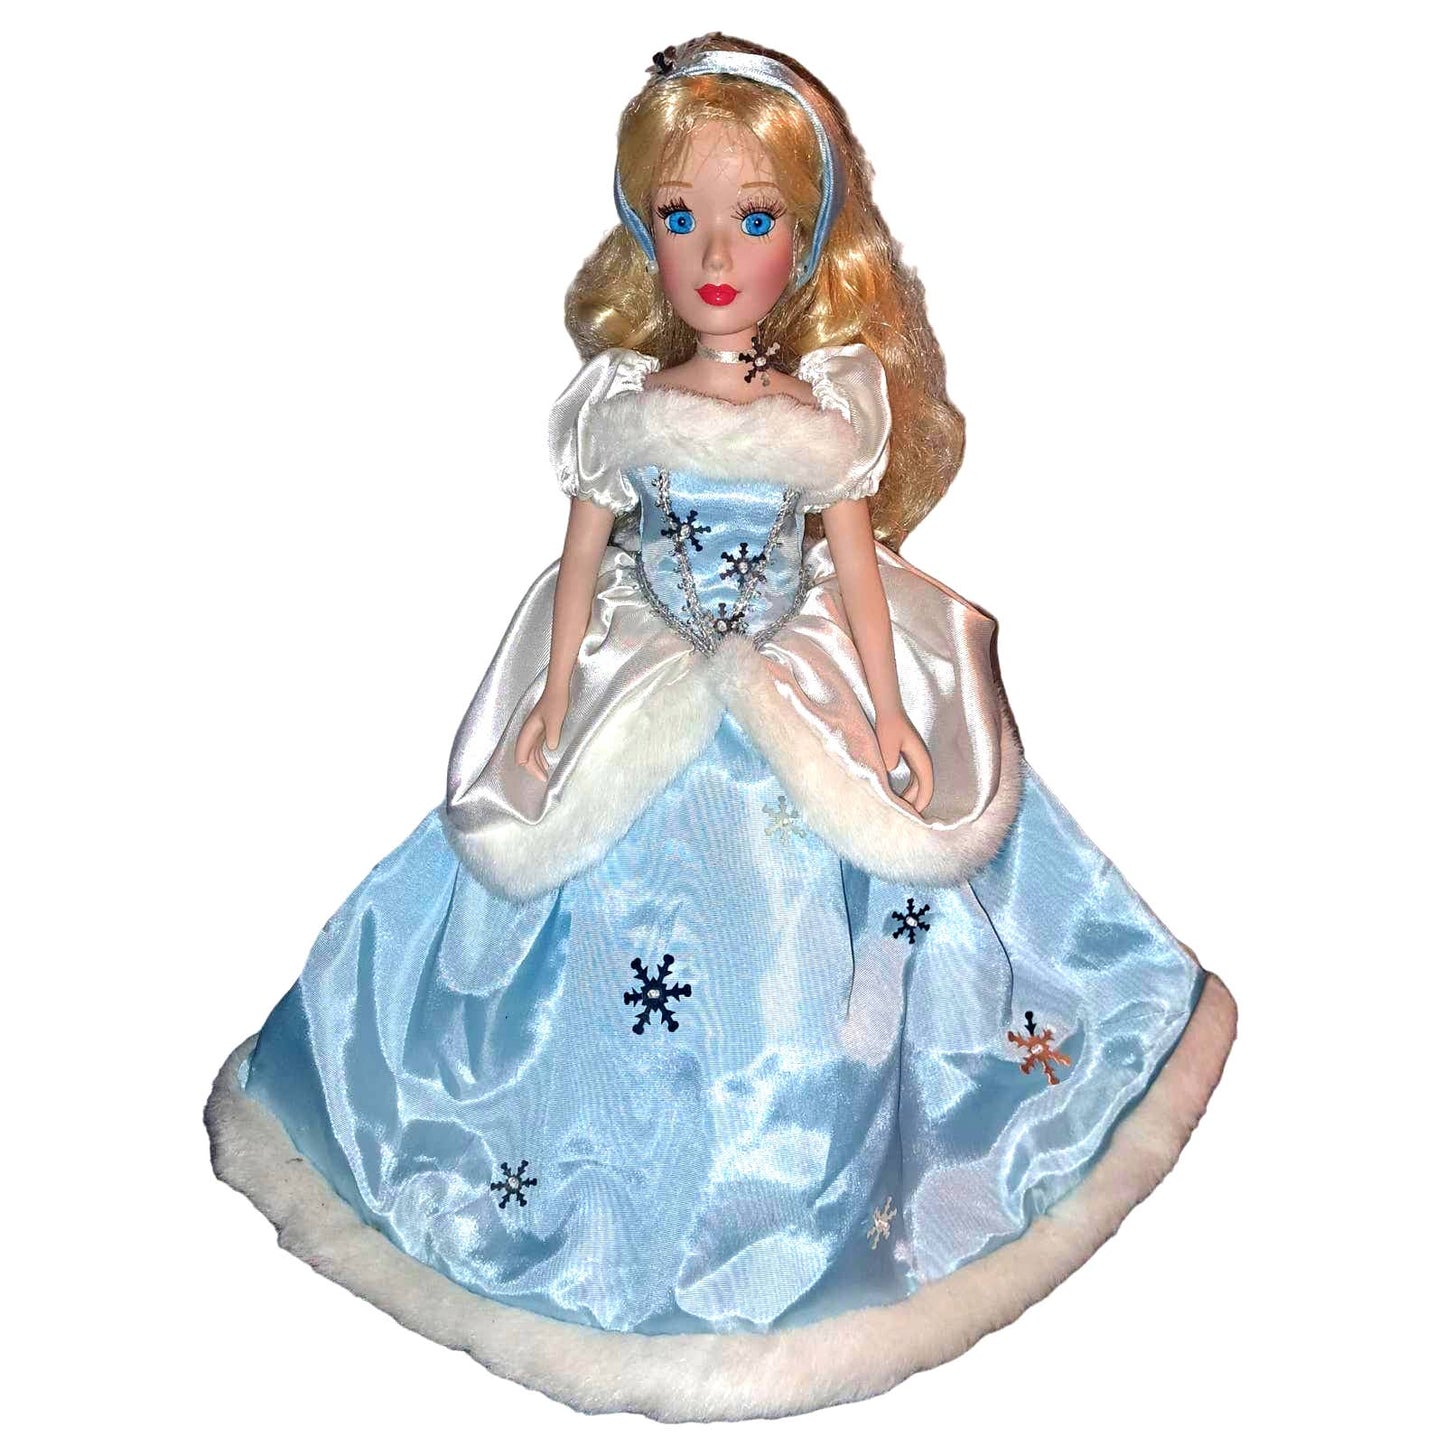 BEAUTIFUL Vintage Porcelain Cinderella Holiday 14 inch Collectors Doll